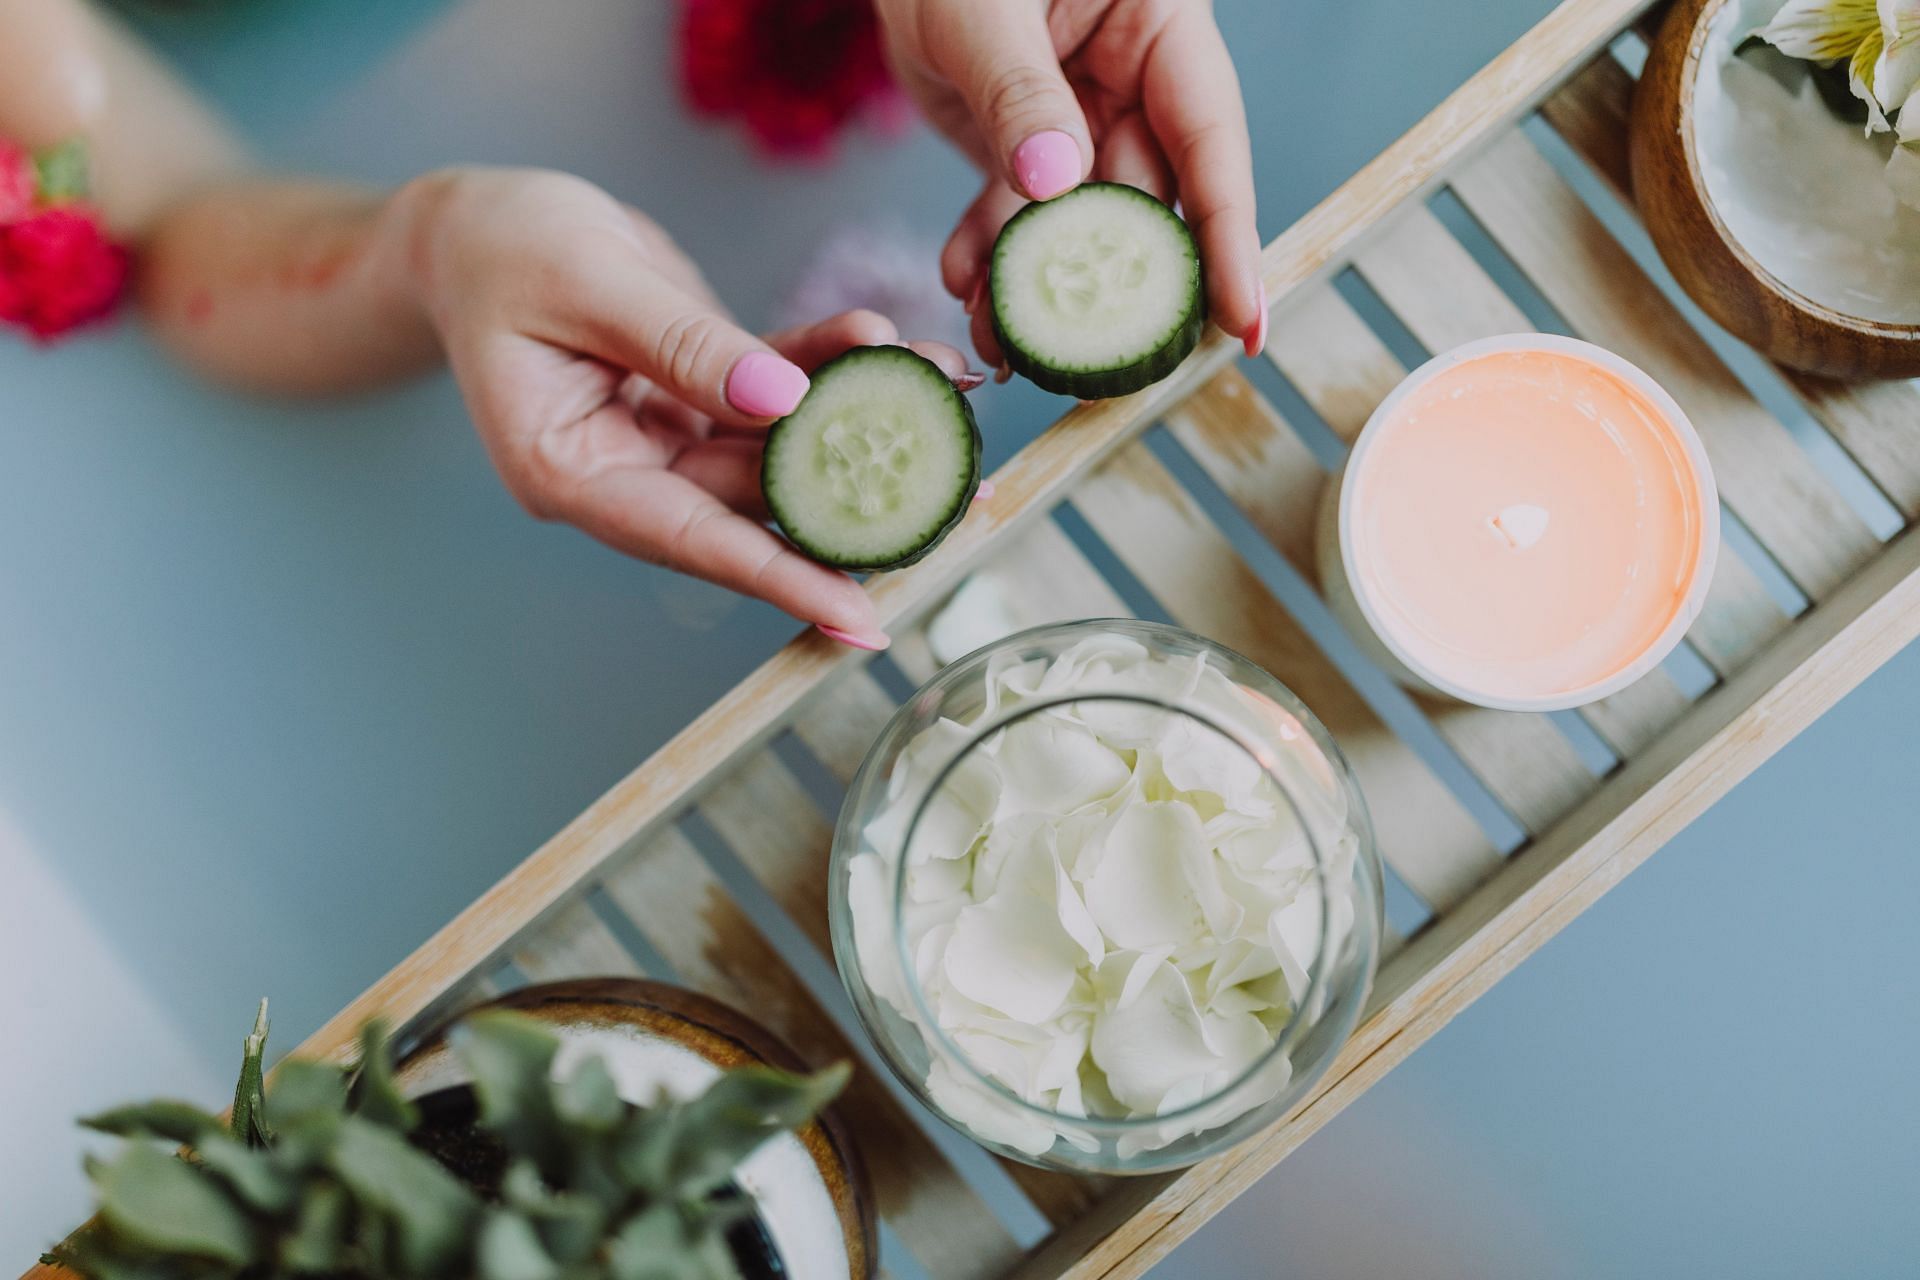 Cucumbers provide hydration to the skin. (Image via Pexels/ Rodnae Production)